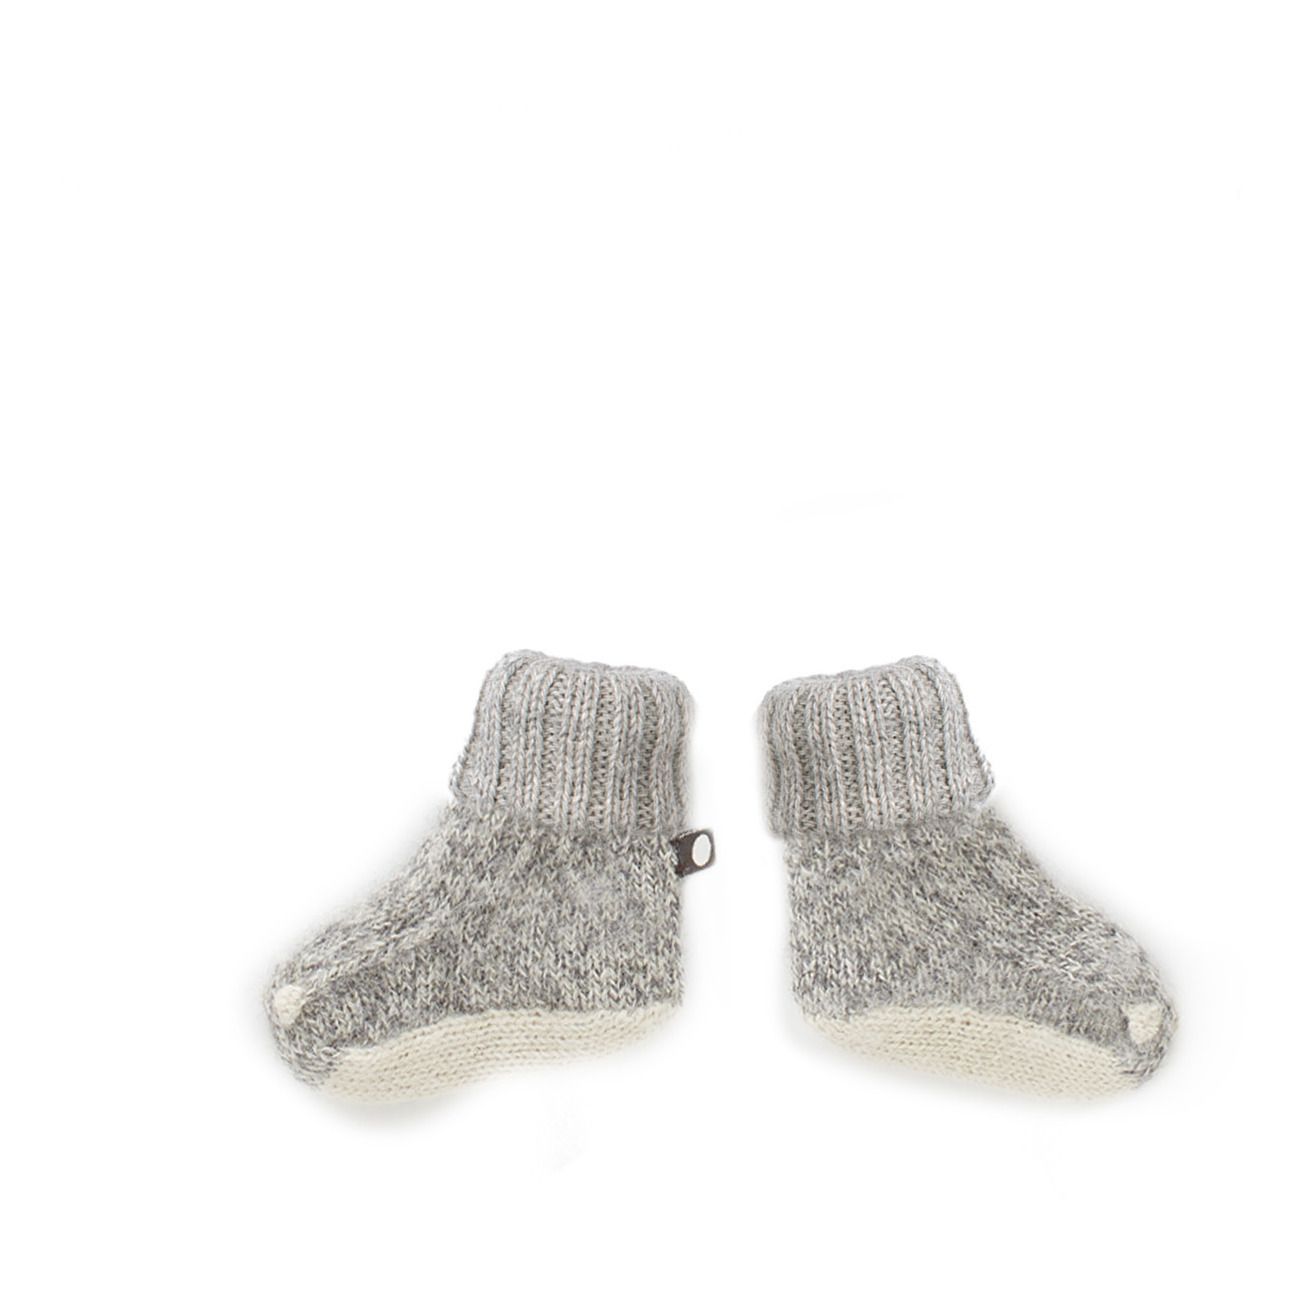 Oeuf NYC - Chaussons Baby Alpaga Bunny - Fille - Gris chiné